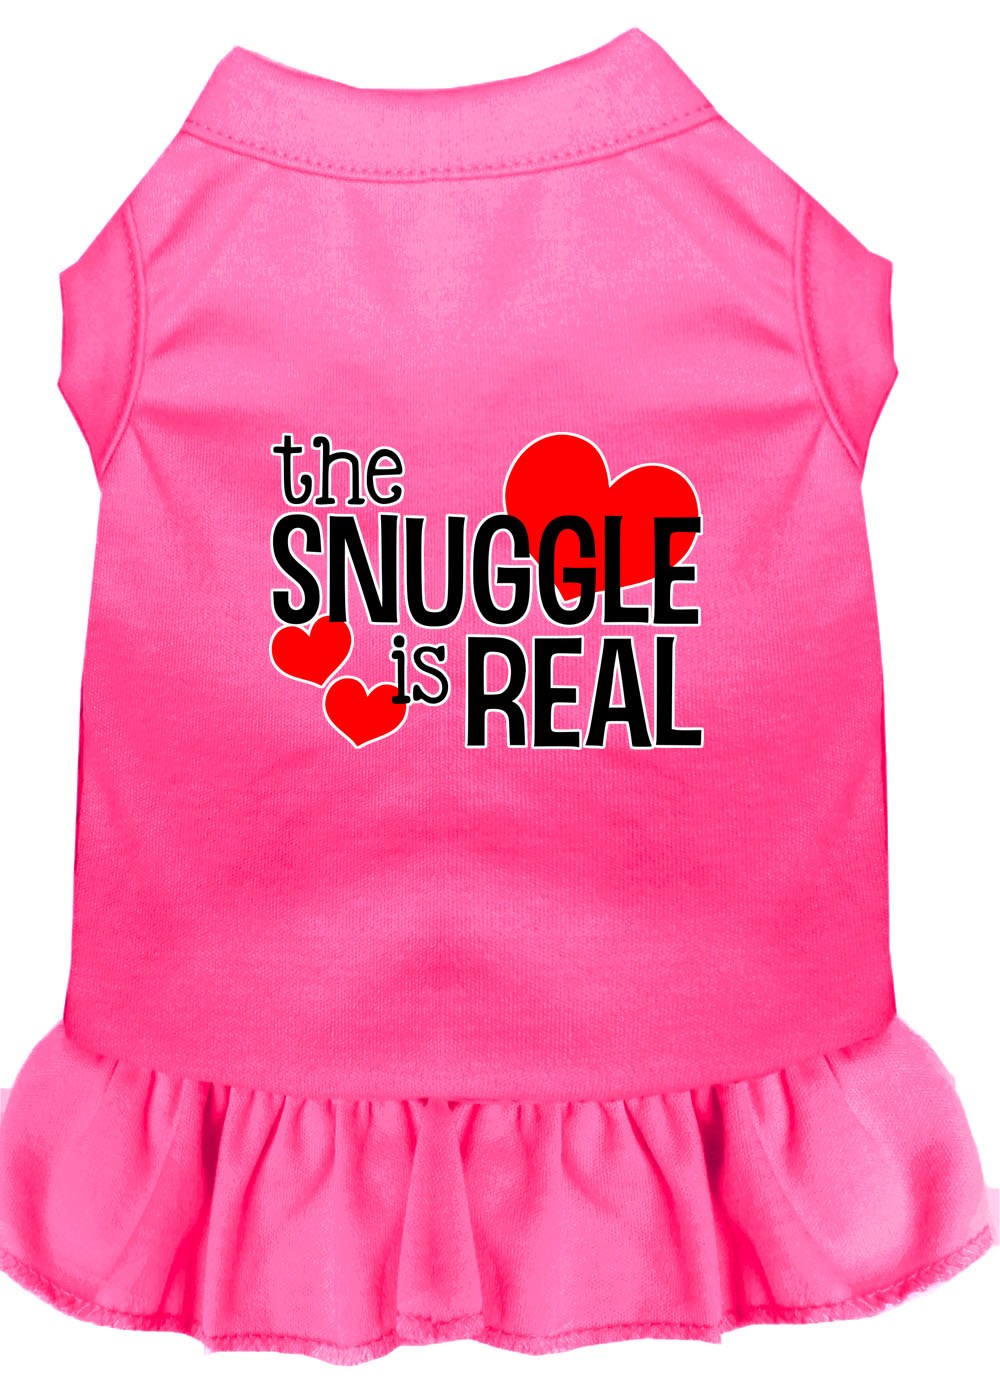 The Snuggle is Real Screen Print Dog Dress Bright Pink XS